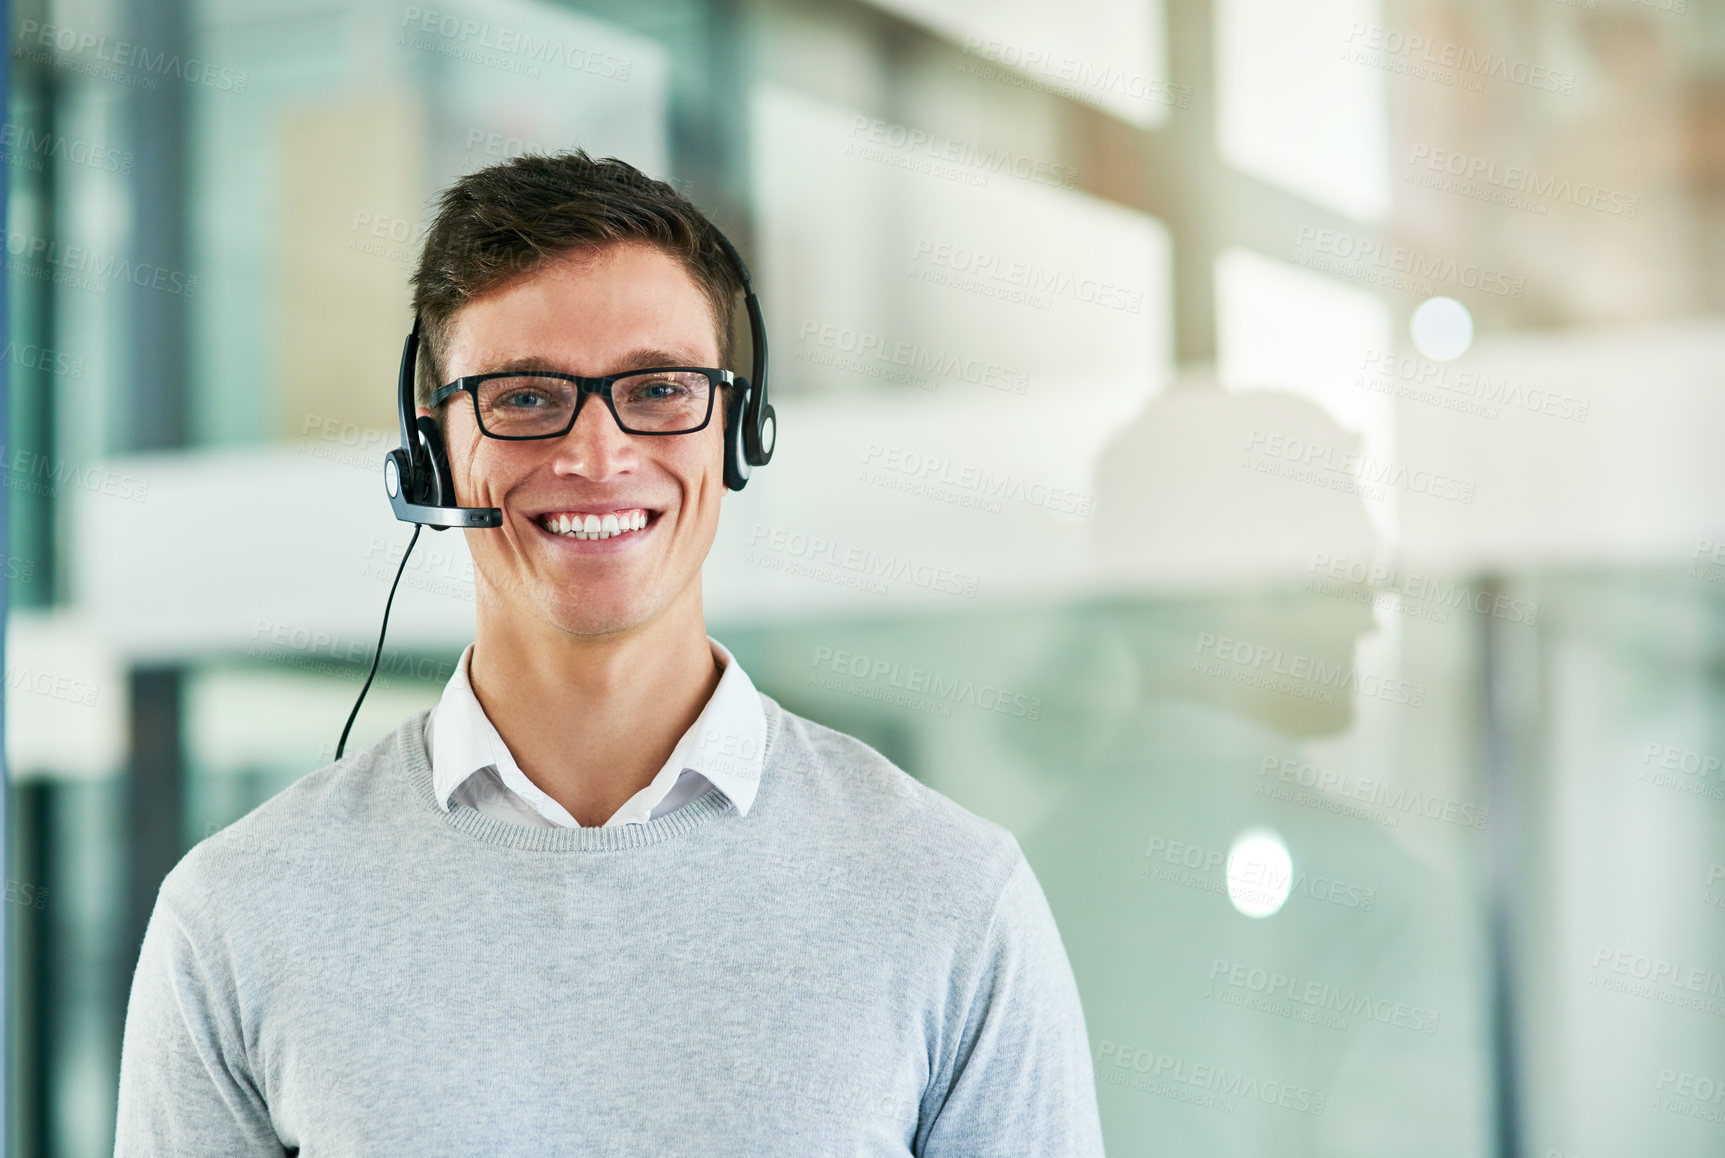 Buy stock photo Portrait of a young call center agent working in an office